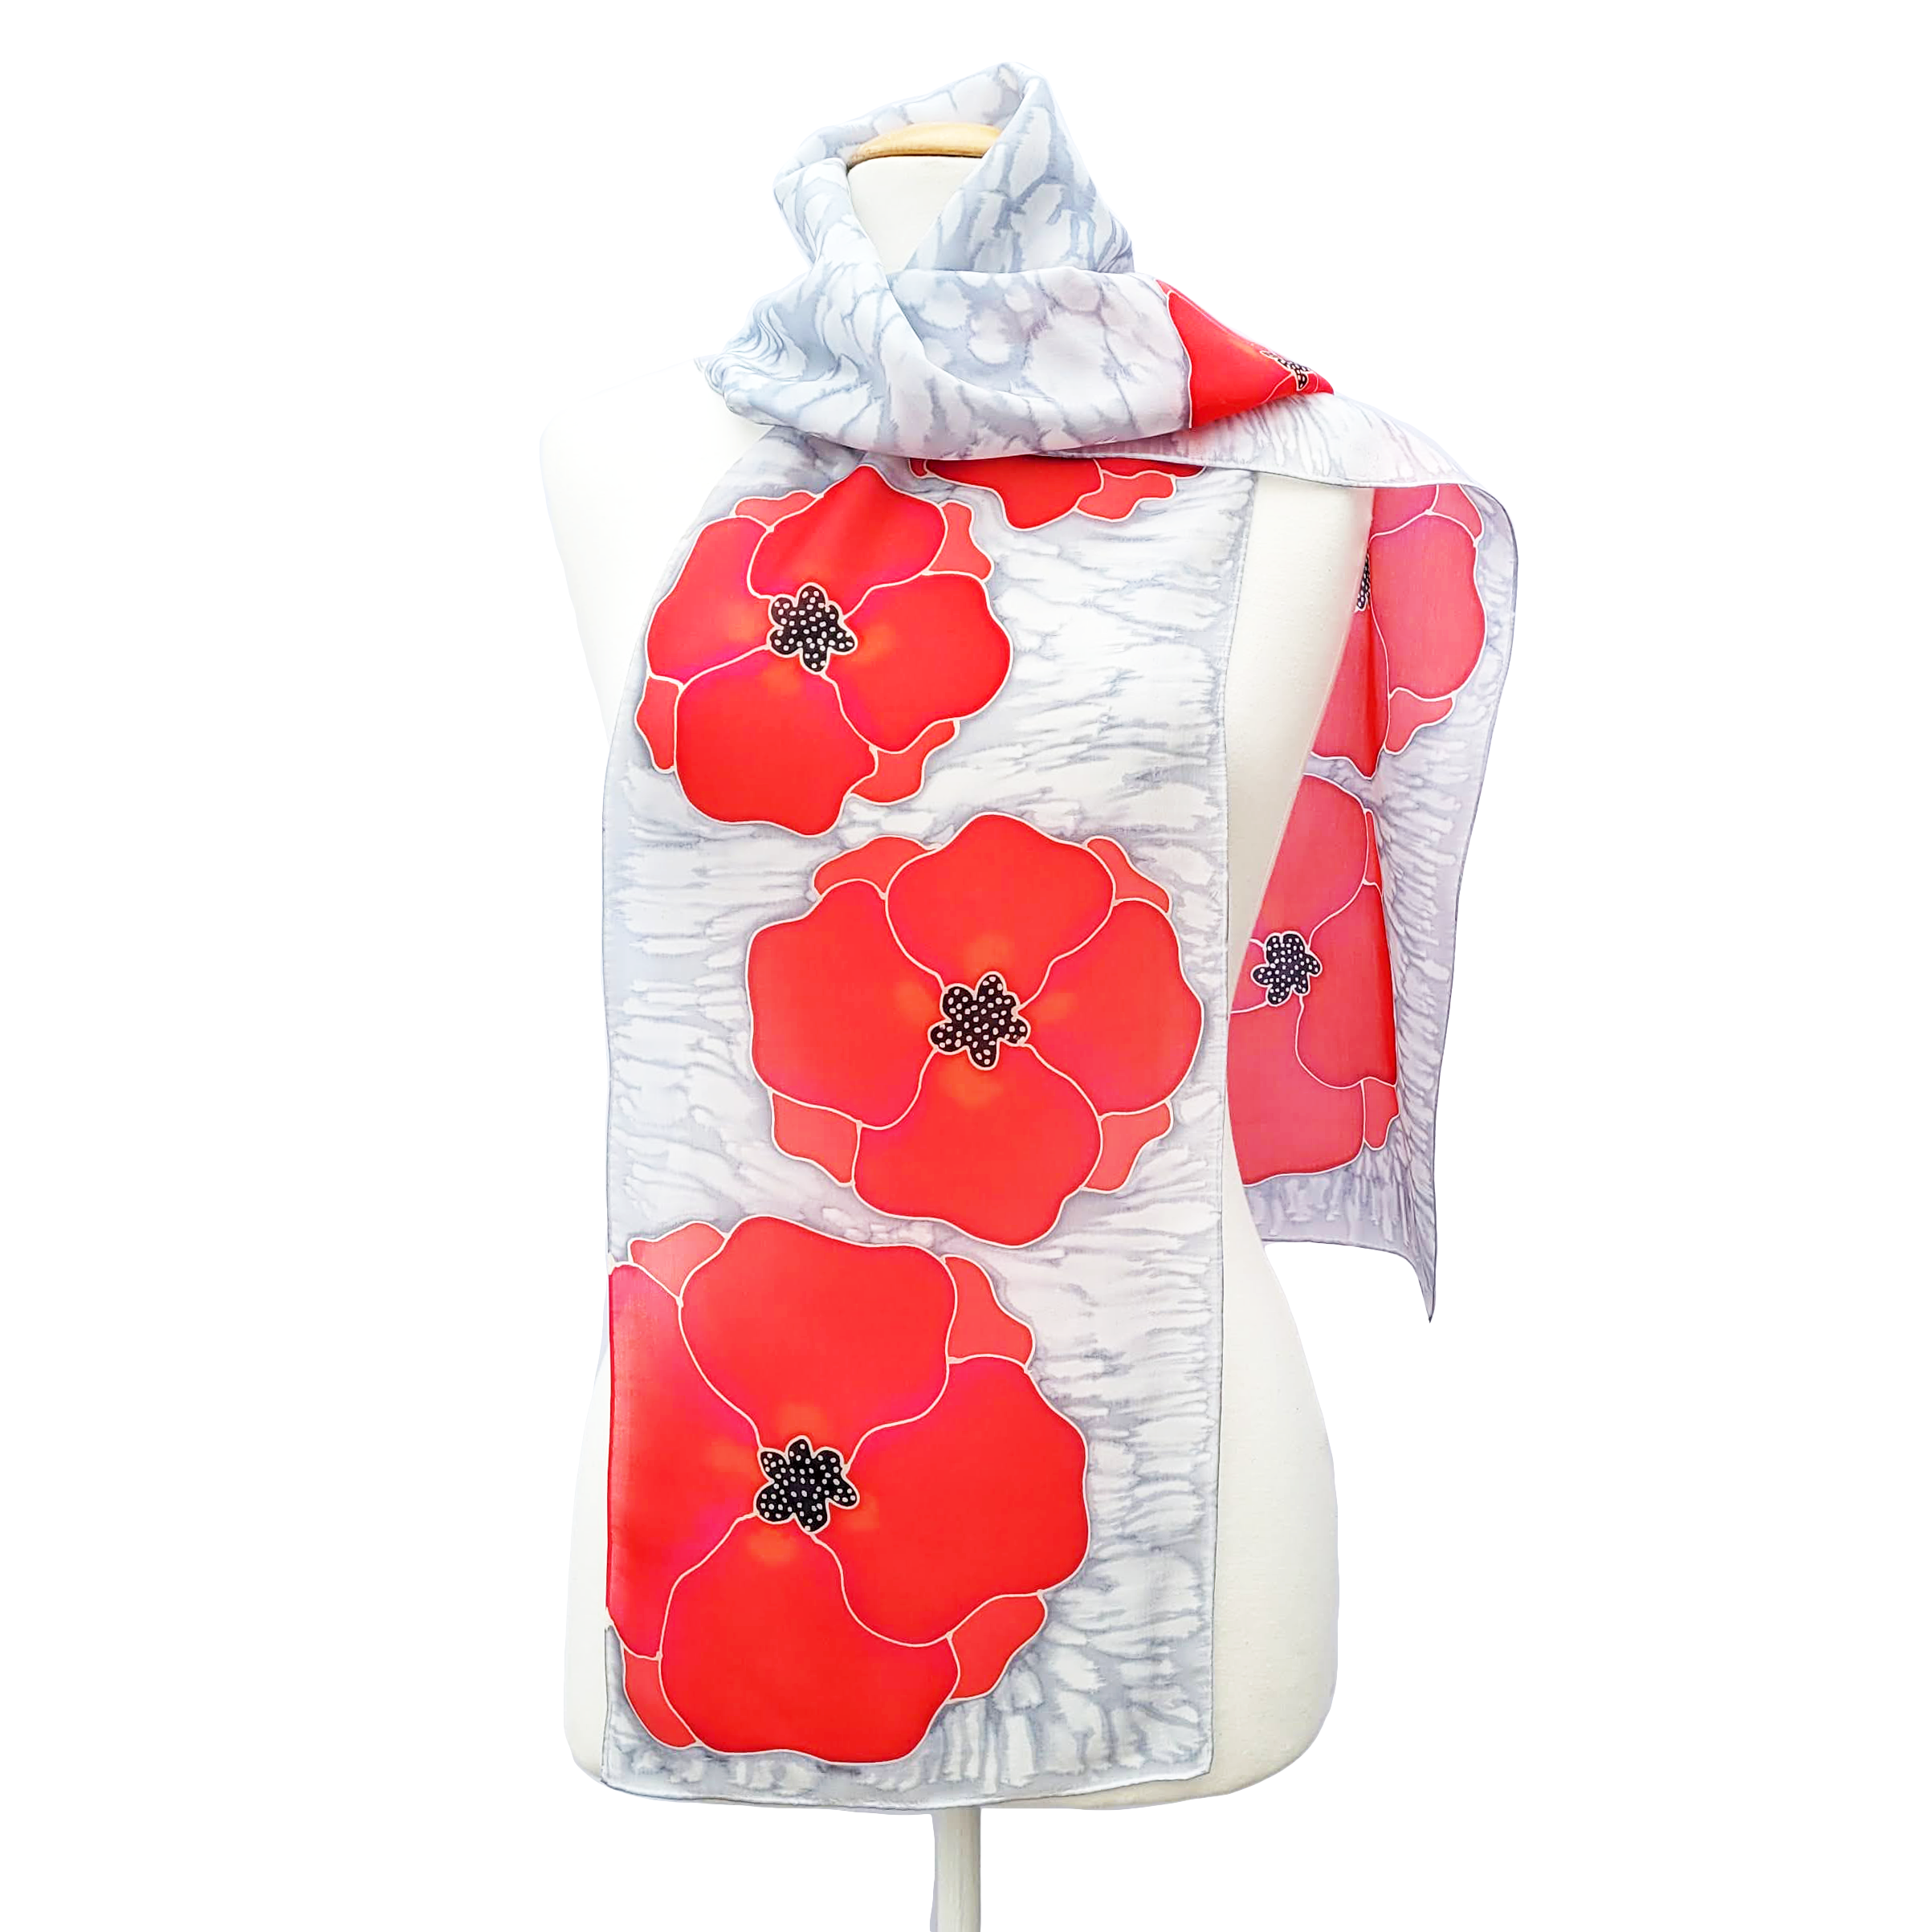 remembrance day red poppies hand painted silk scarf made in Canada by Lynne Kiel